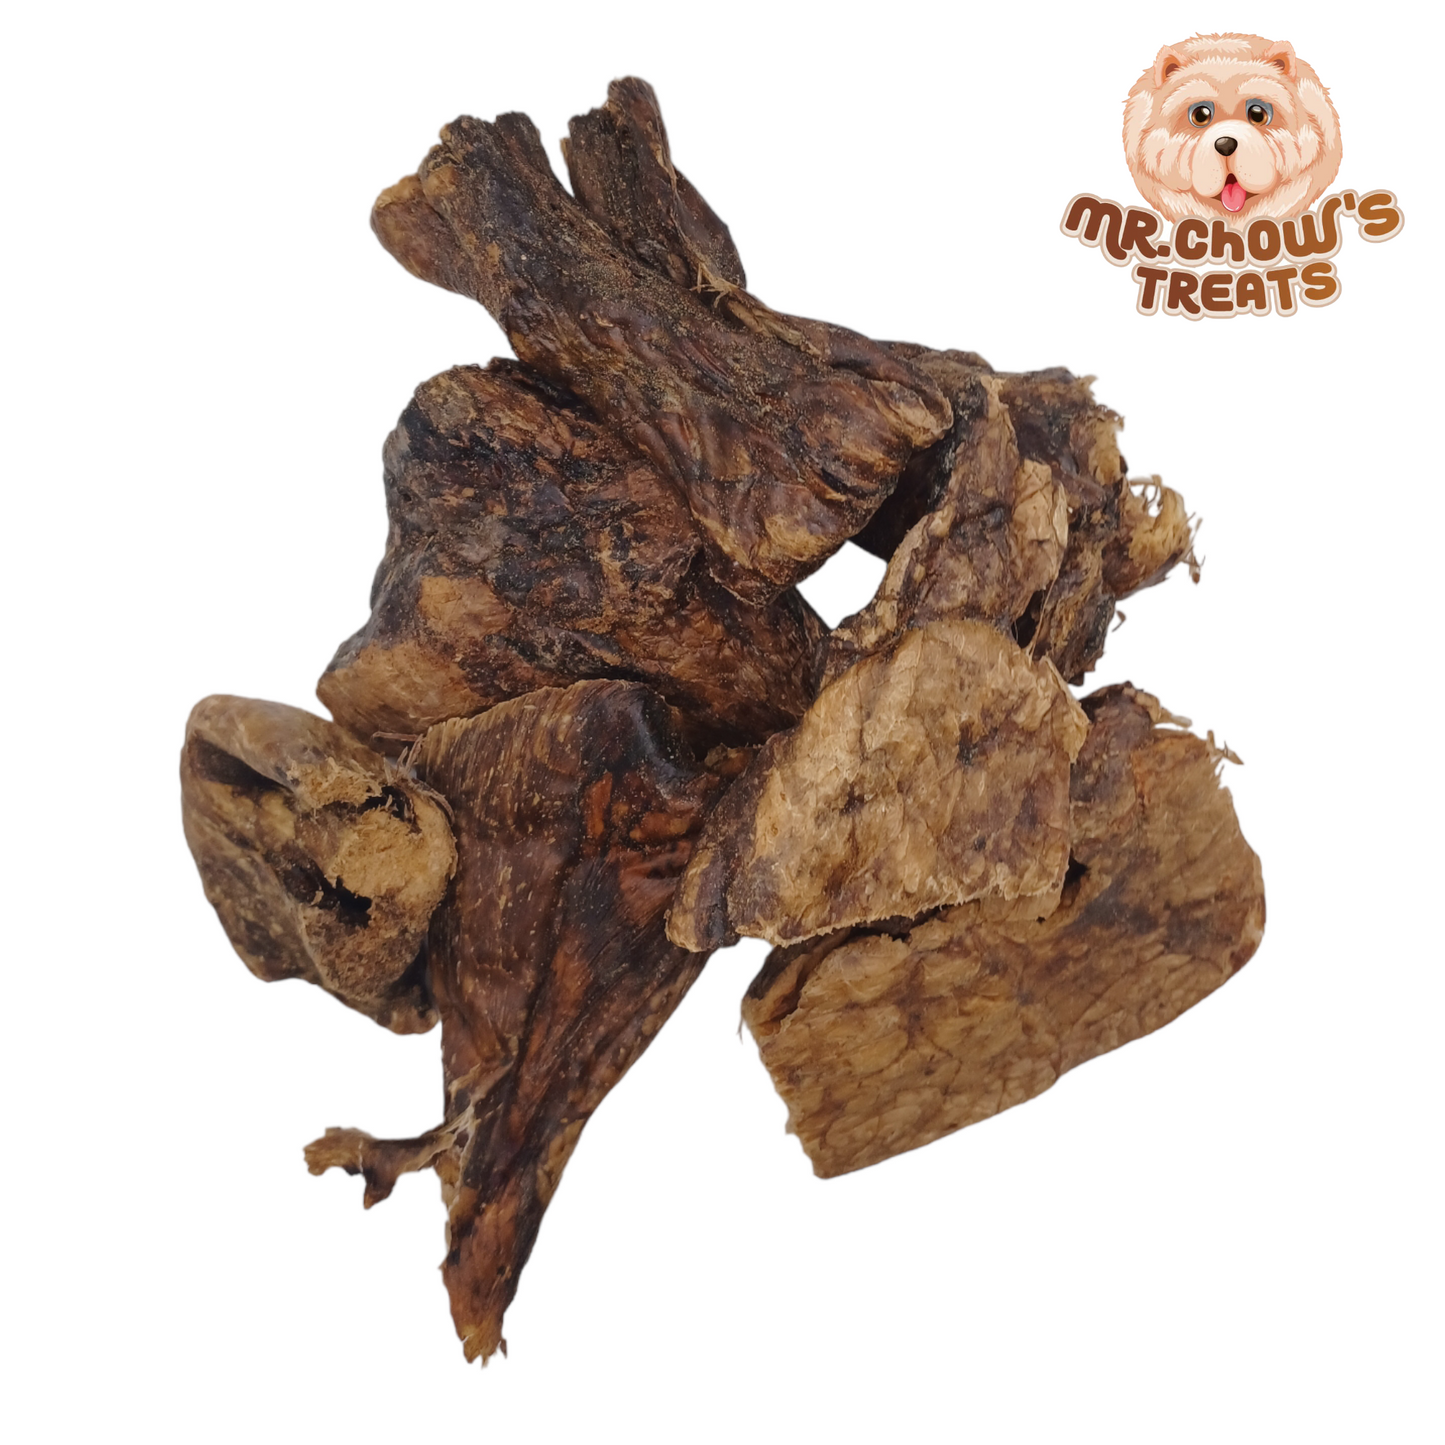 Beef Jerky - 100% Natural Air-Dried Beef Jerky